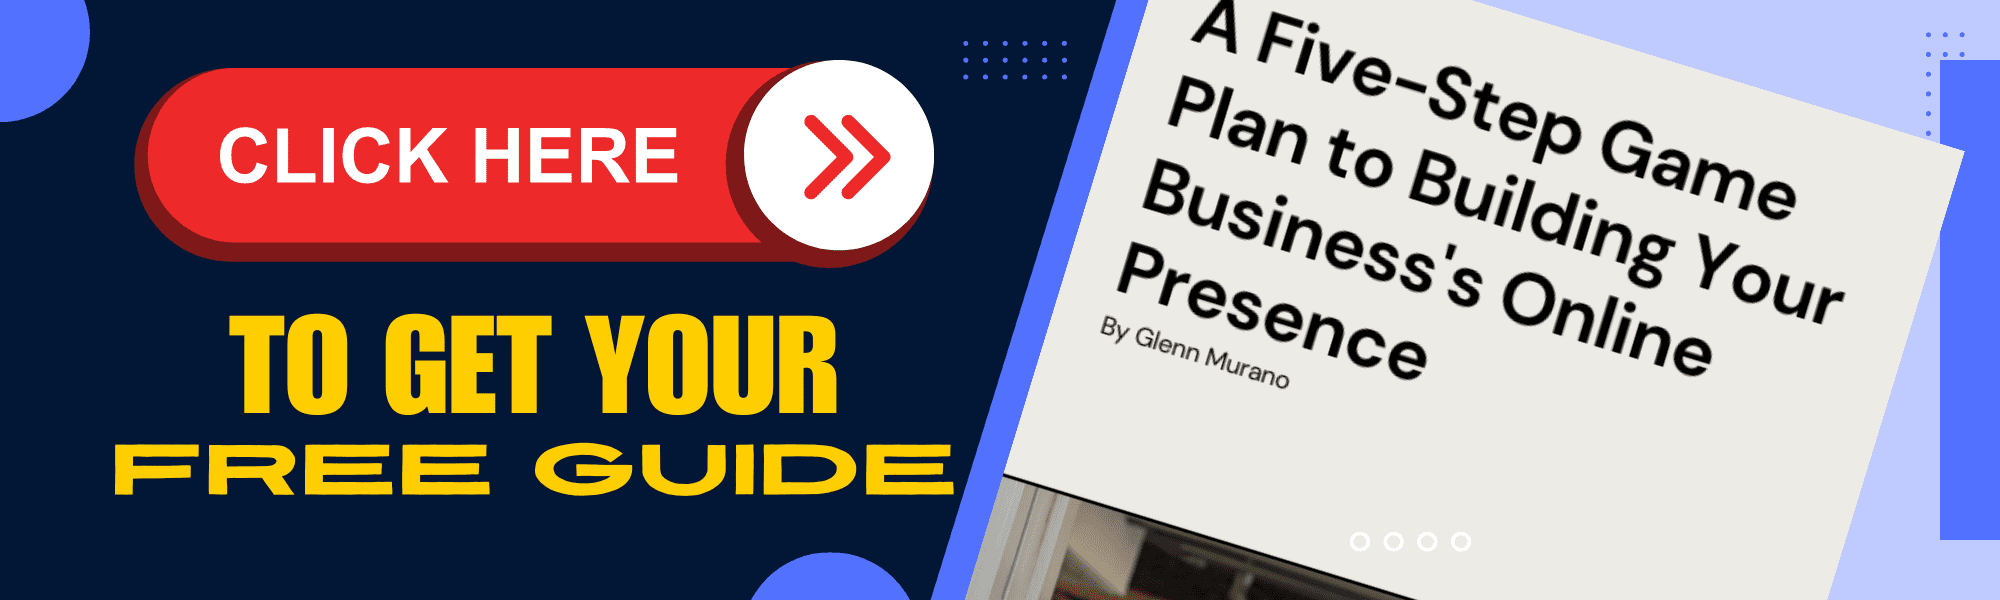 Promotional banner with a bold red button labeled 'Click Here' and text 'To Get Your Free Guide'. Next to it is an image of a digital guide titled 'A Five-Step Game Plan to Building Your Business's Online Presence' by Glenn Murano, set against a modern, colorful background